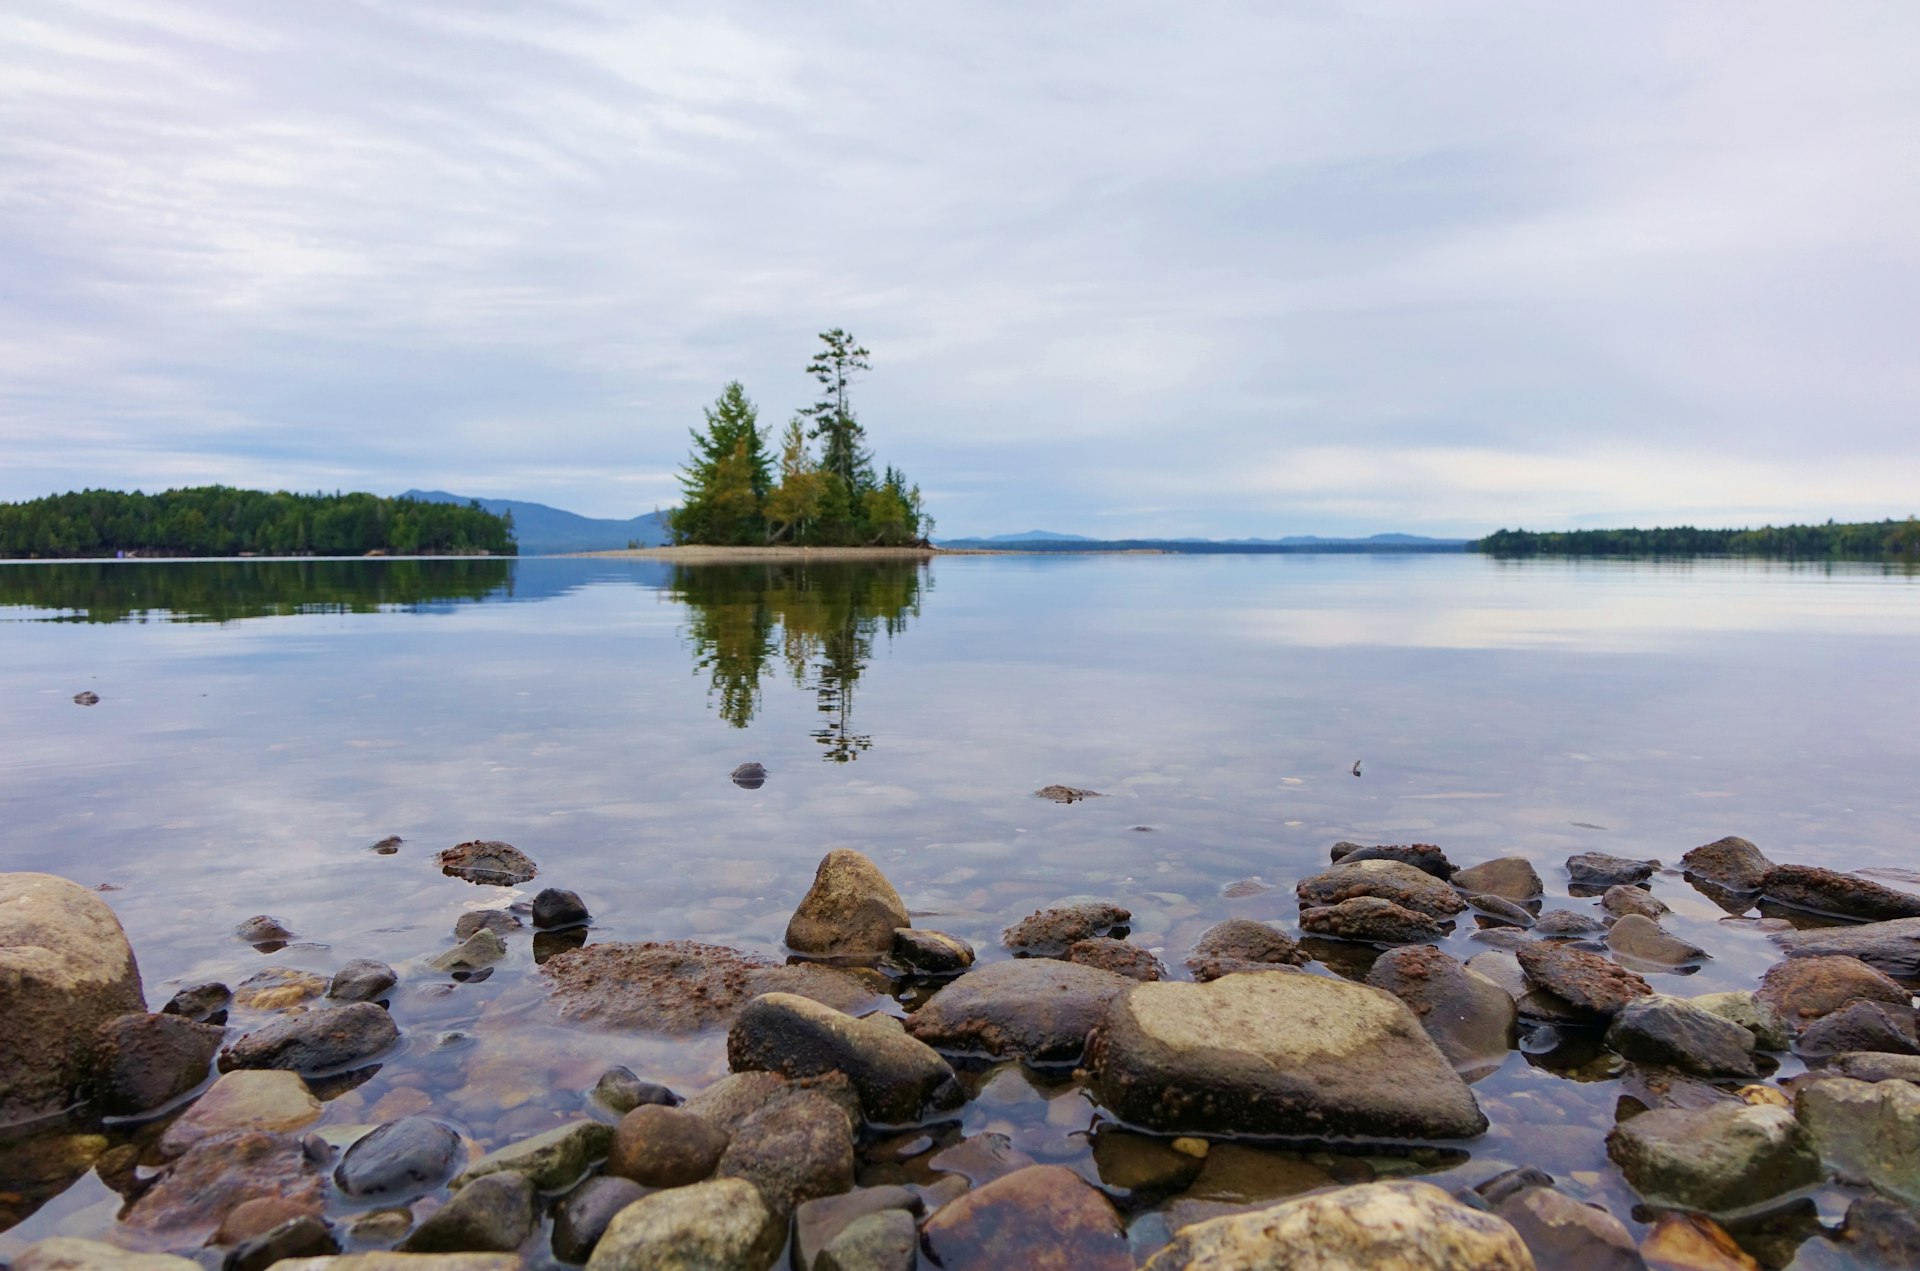 From ground level on a rocky beach on Moosehead Lake in Lily Bay State Park in Maine you see a very calm lake with trees on a small island reflected on the still water under a cloudy autumn sky